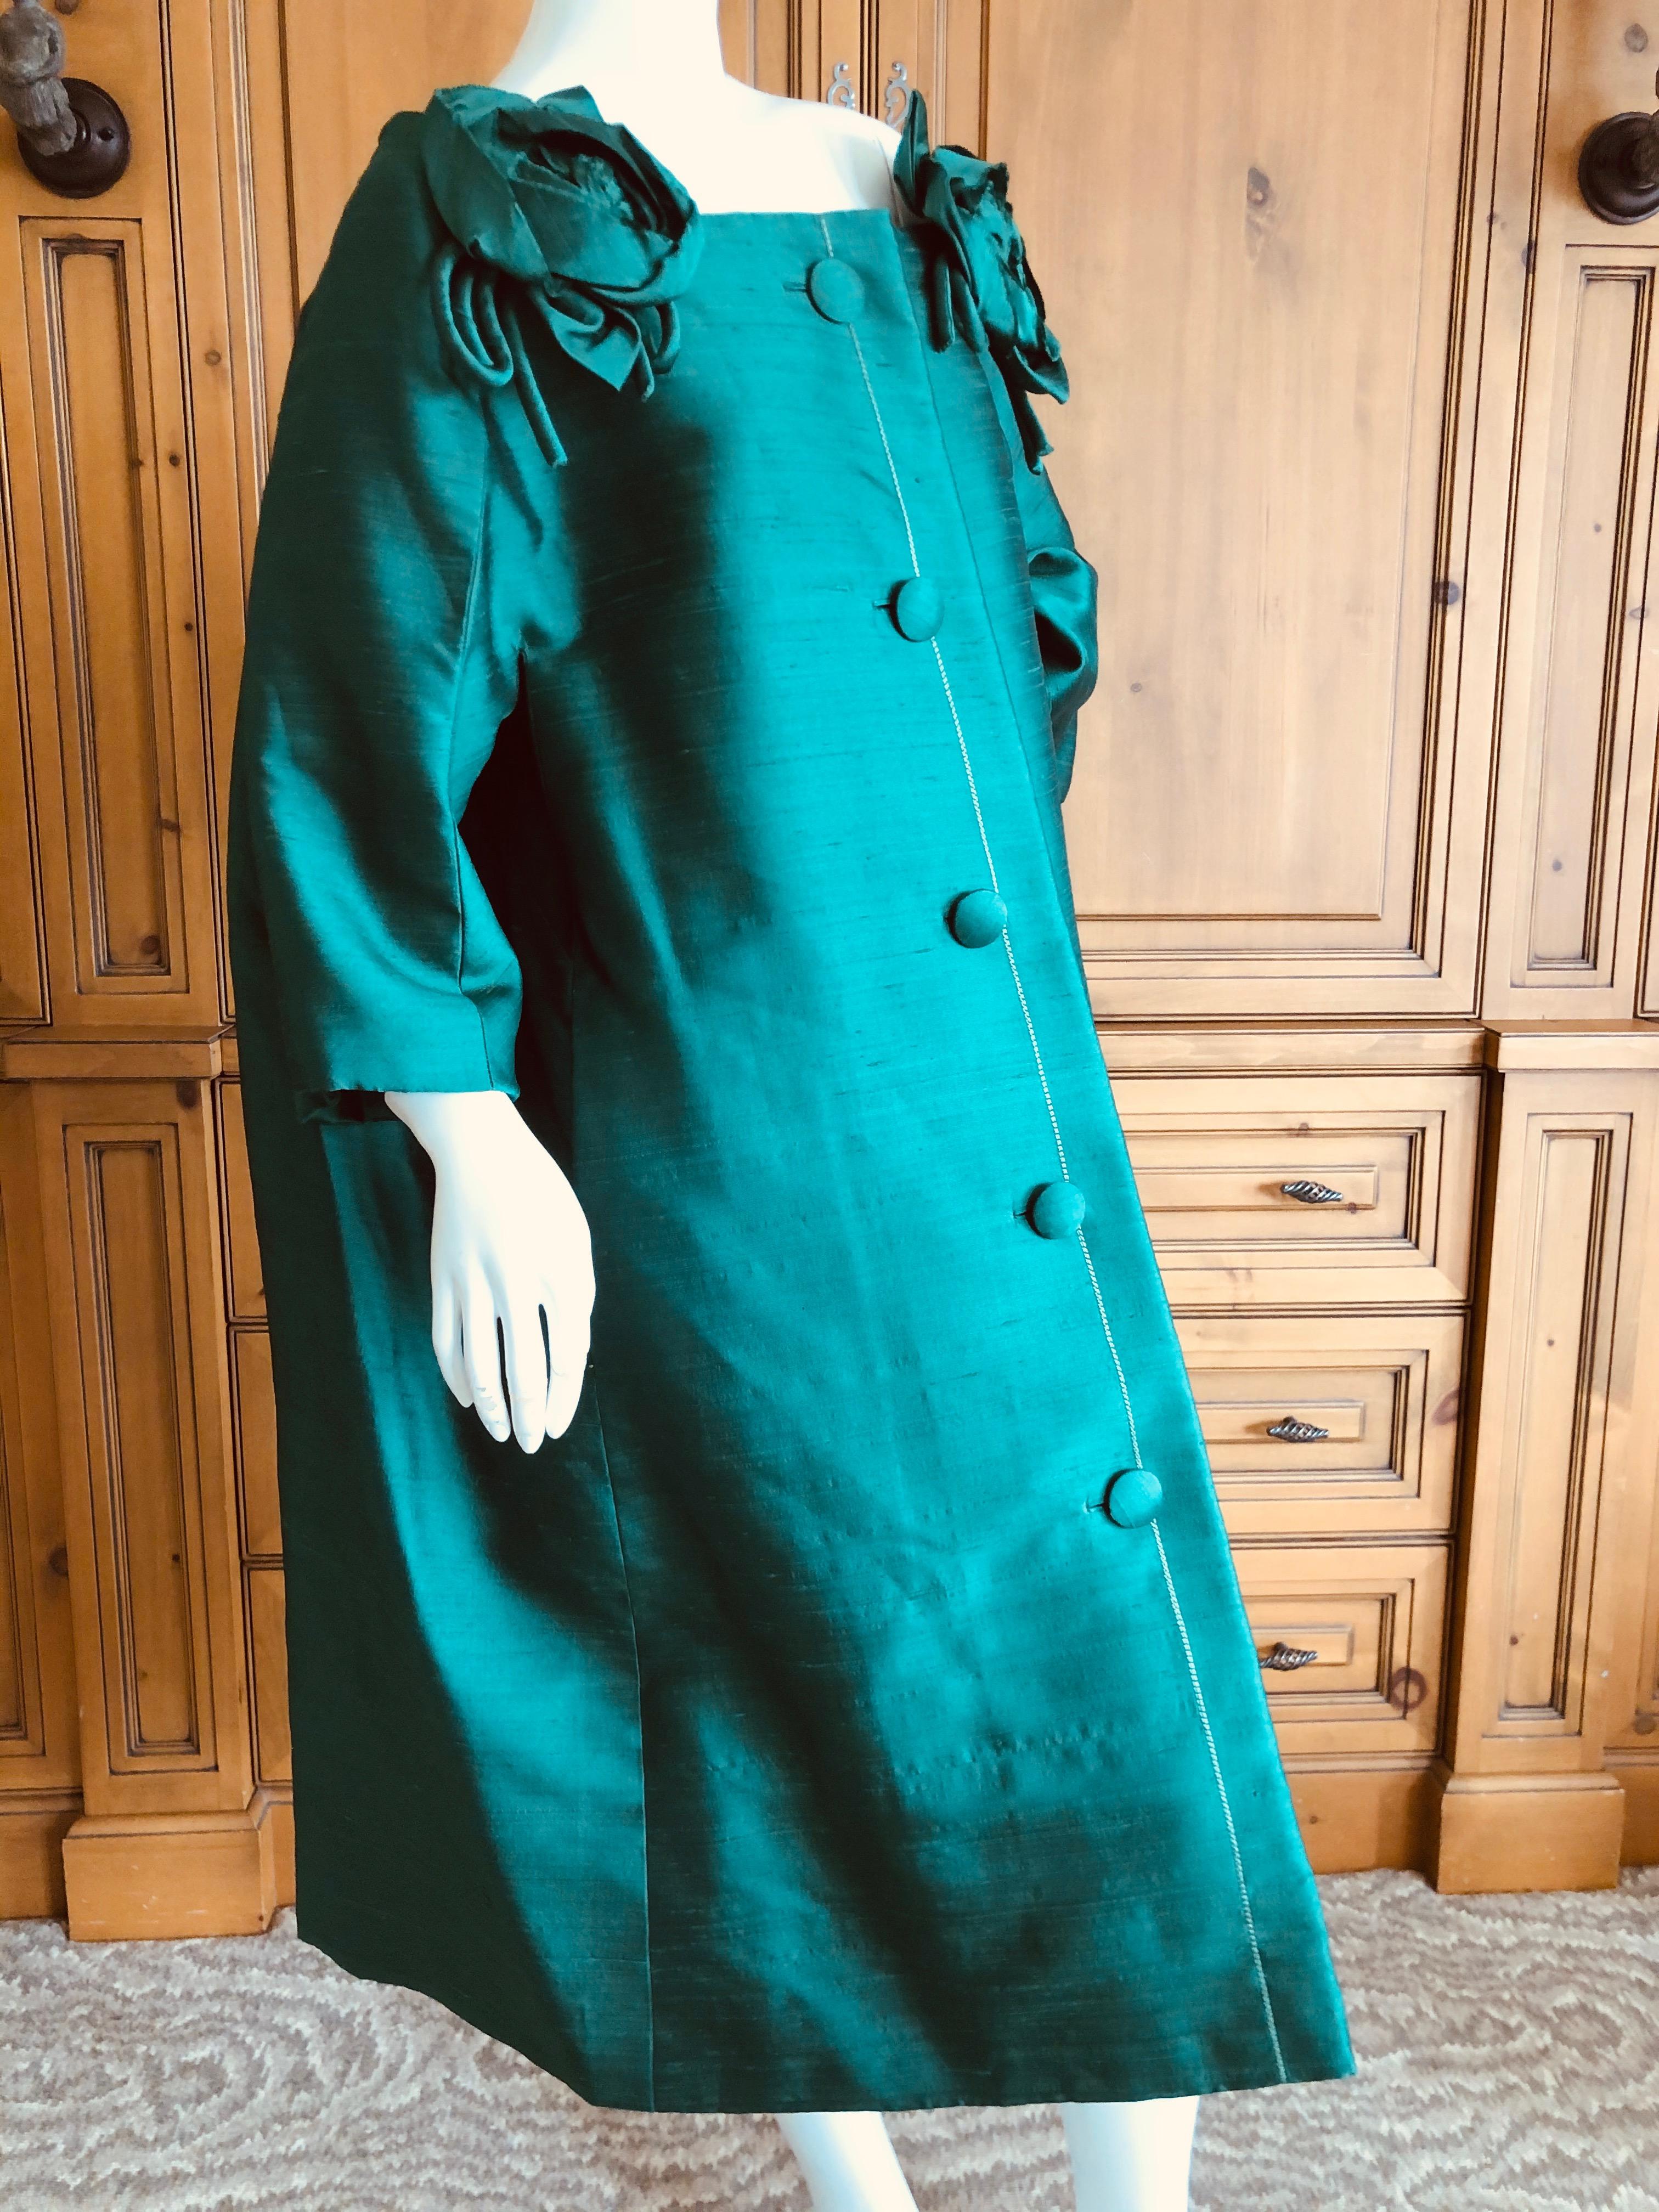 Christian Dior Printemps 1959 Numbered Haute Couture Coat by Yves Saint Laurent For Sale 4